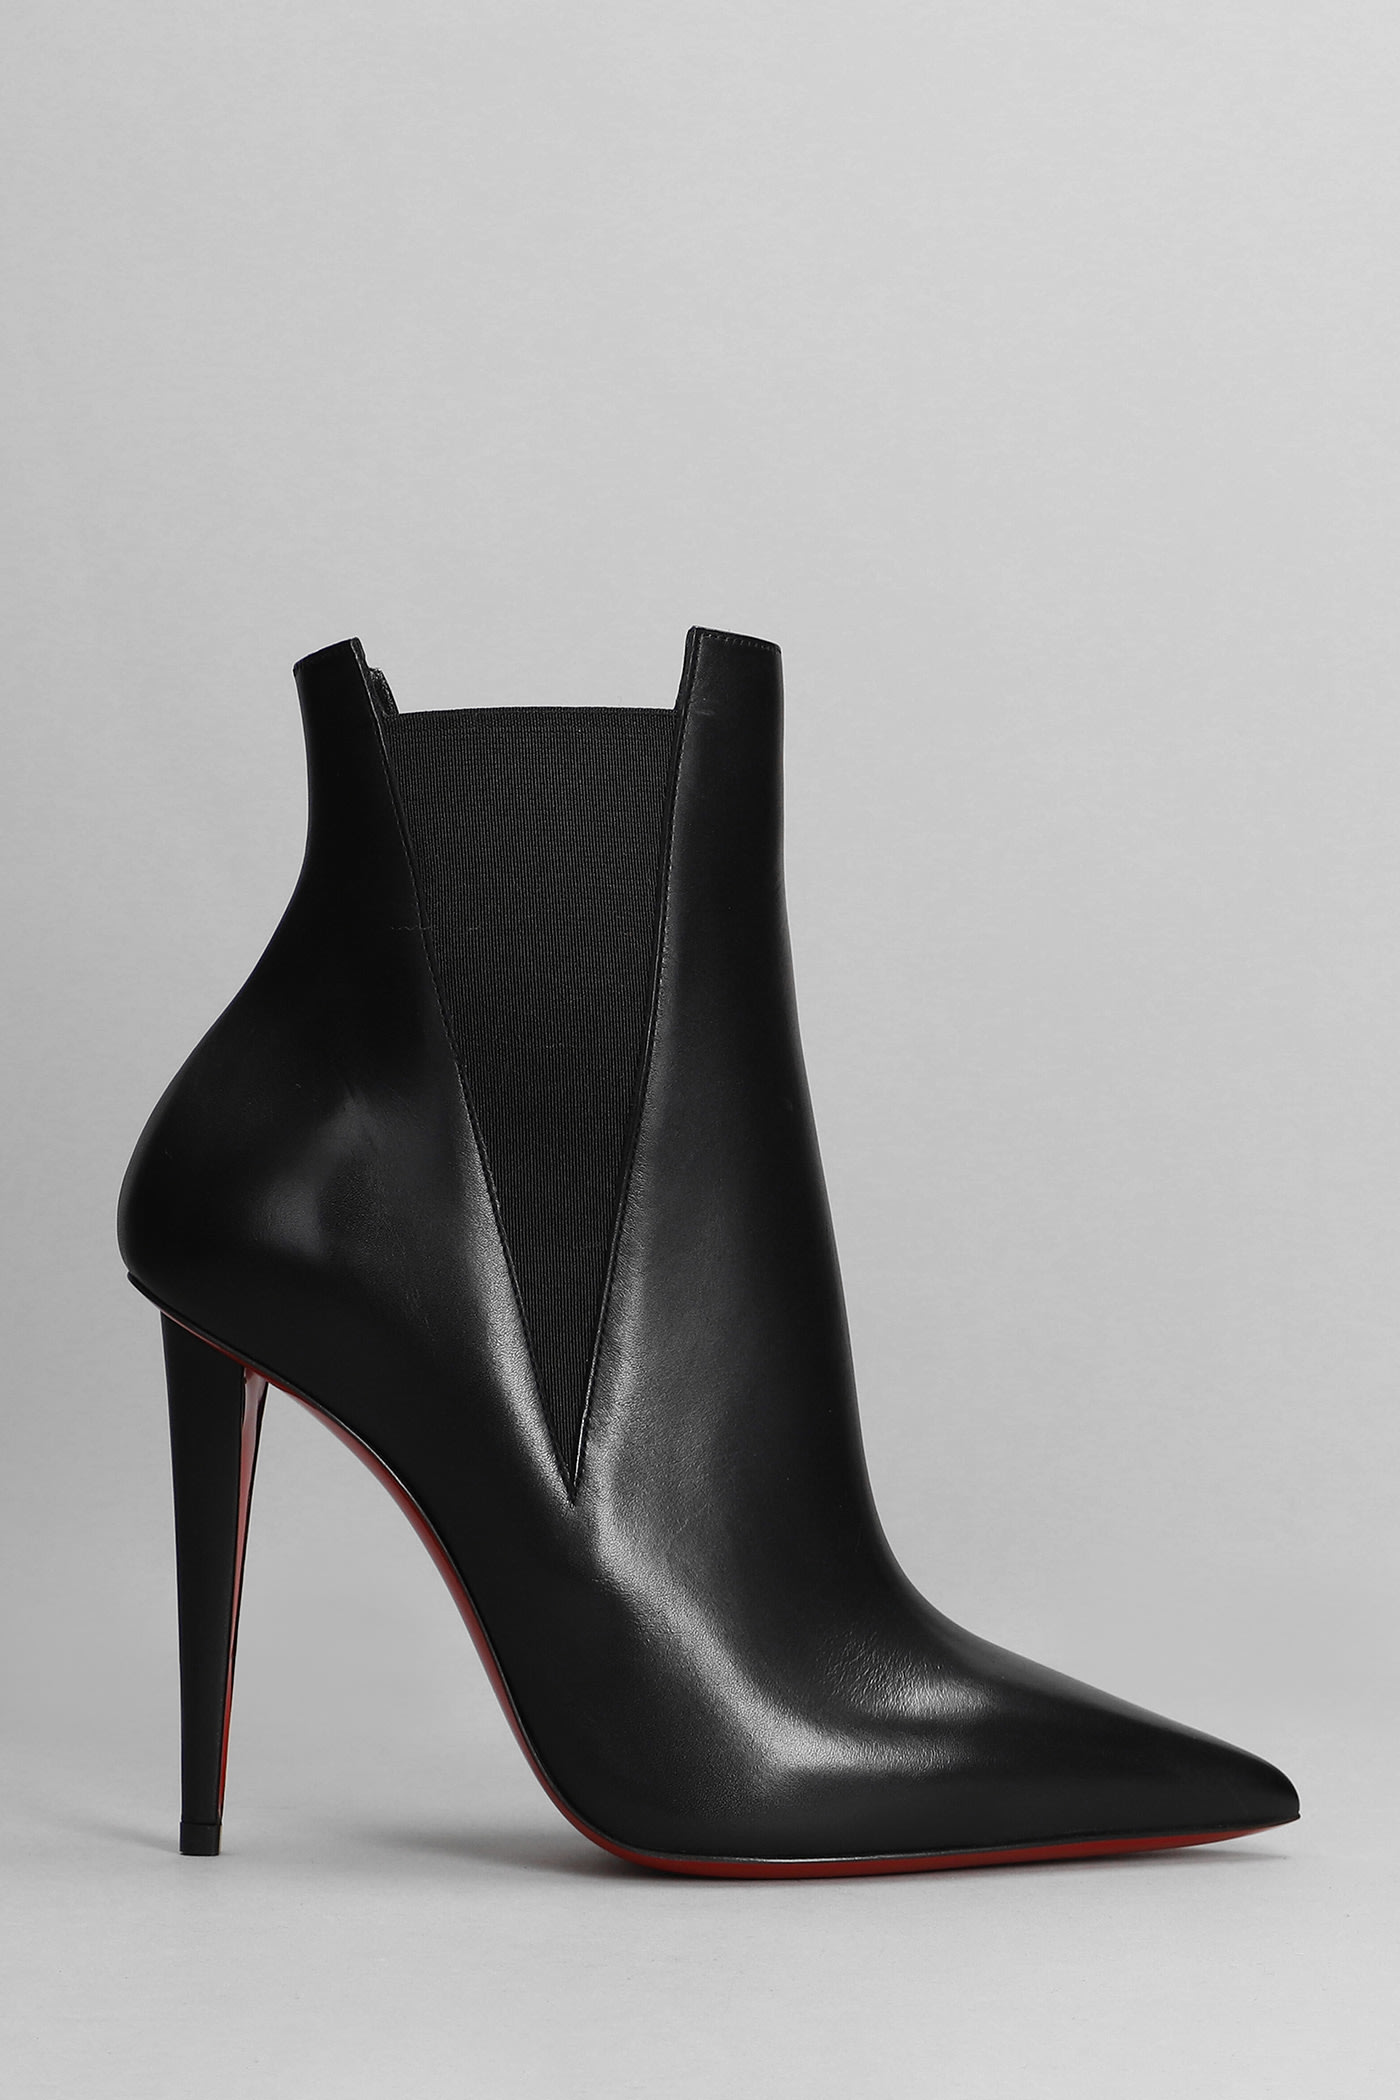 Christian Louboutin Astribooty 100 High Heels Ankle Boots In Black Leather